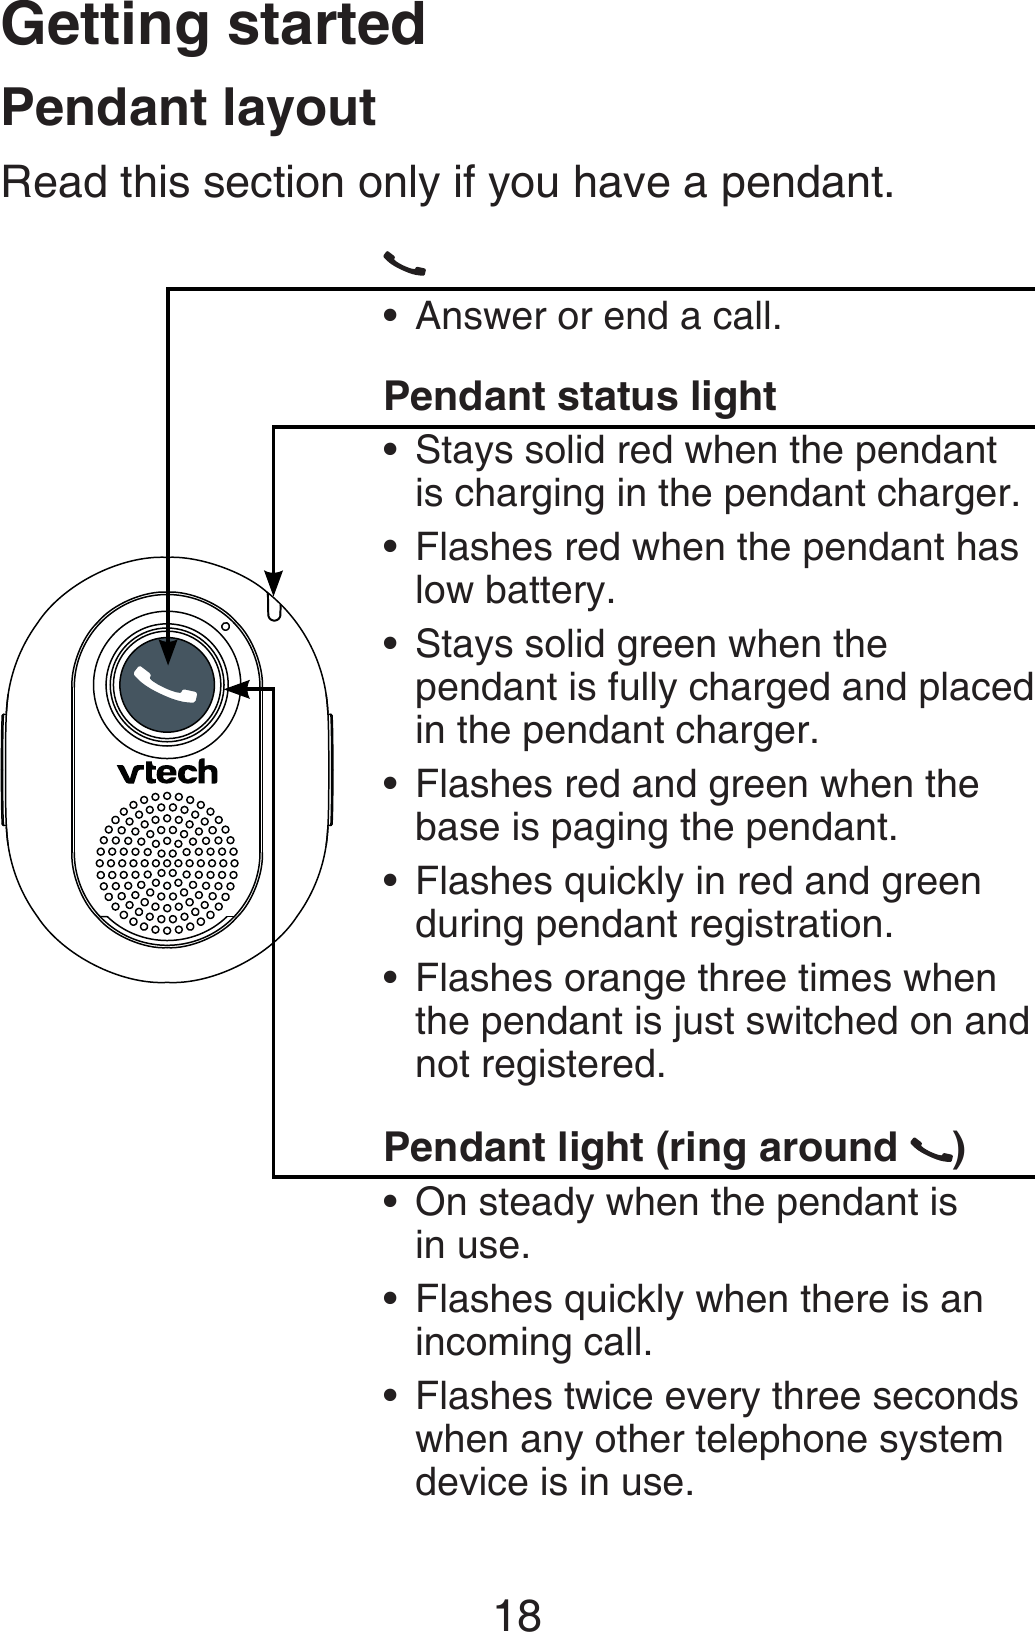 Getting started18Answer or end a call.Pendant status lightStays solid red when the pendant is charging in the pendant charger.Flashes red when the pendant has low battery.Stays solid green when the pendant is fully charged and placed in the pendant charger.Flashes red and green when the base is paging the pendant.Flashes quickly in red and green during pendant registration.Flashes orange three times when the pendant is just switched on and not registered.Pendant light (ring around  )On steady when the pendant is  in use.Flashes quickly when there is an incoming call.Flashes twice every three seconds when any other telephone system device is in use.••••••••••Pendant layoutRead this section only if you have a pendant.